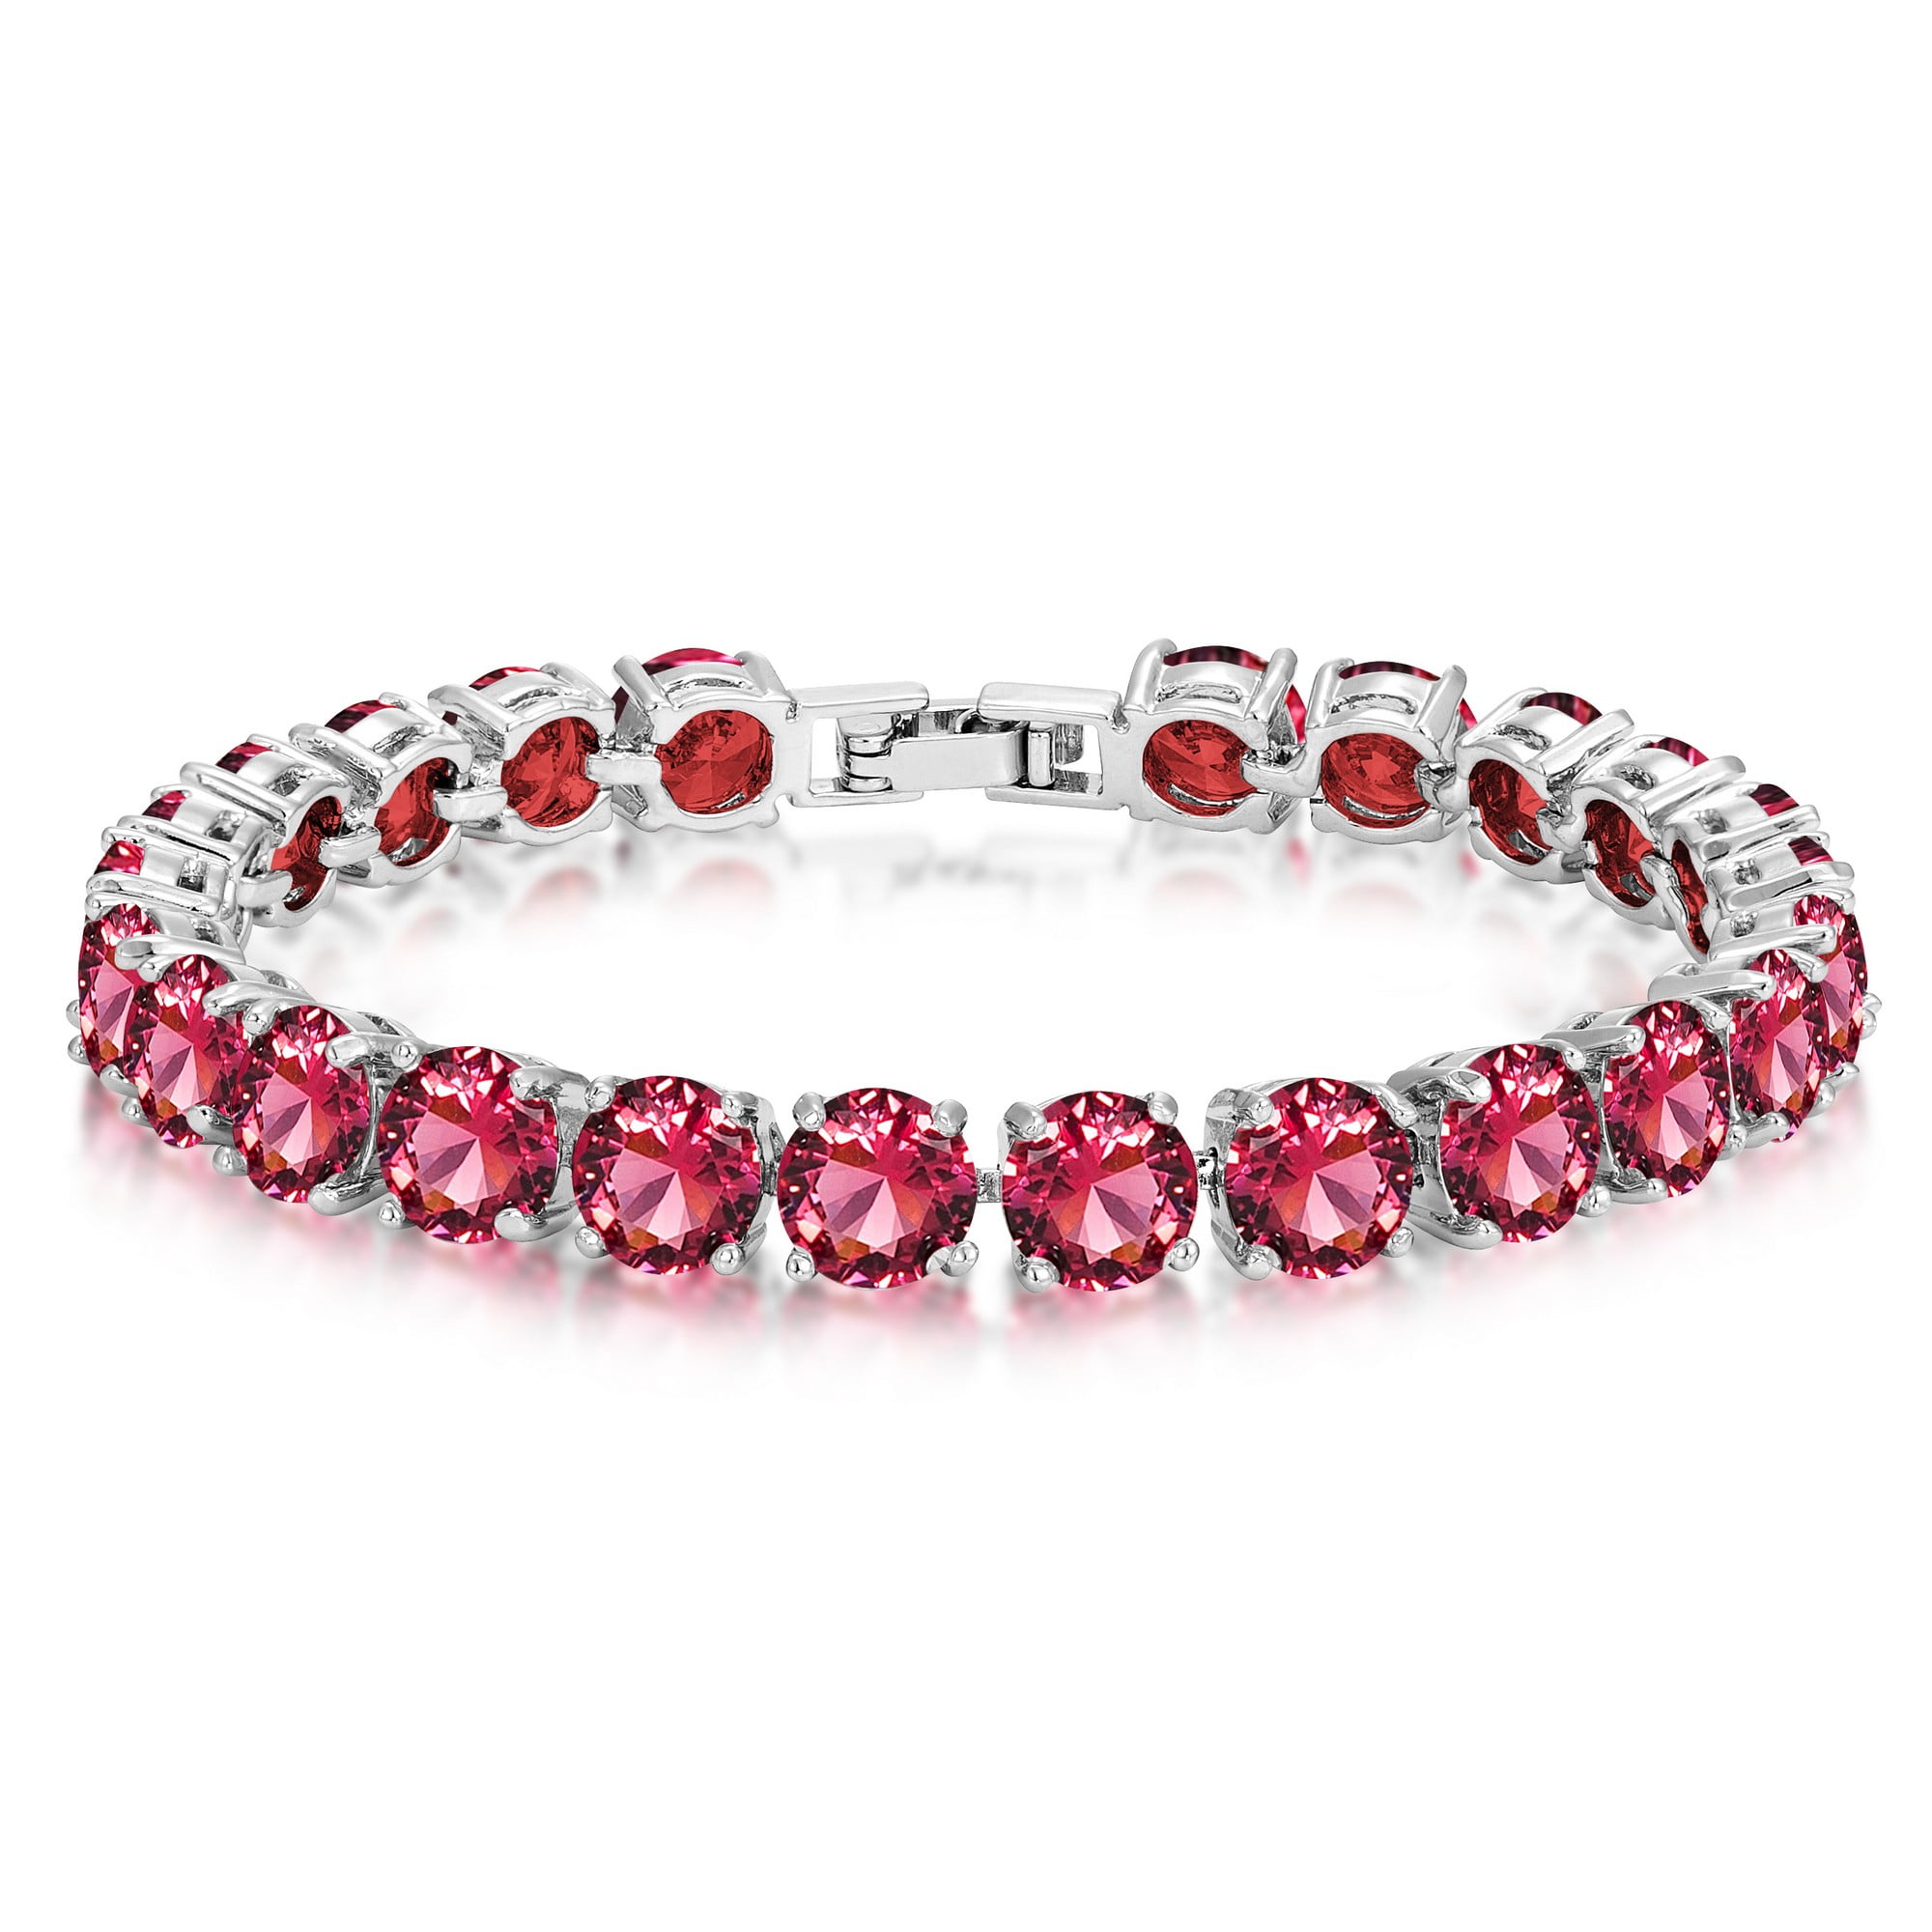 Kezef 7mm Round Cut Simulated Red Ruby Tennis Bracelet in Sterling ...